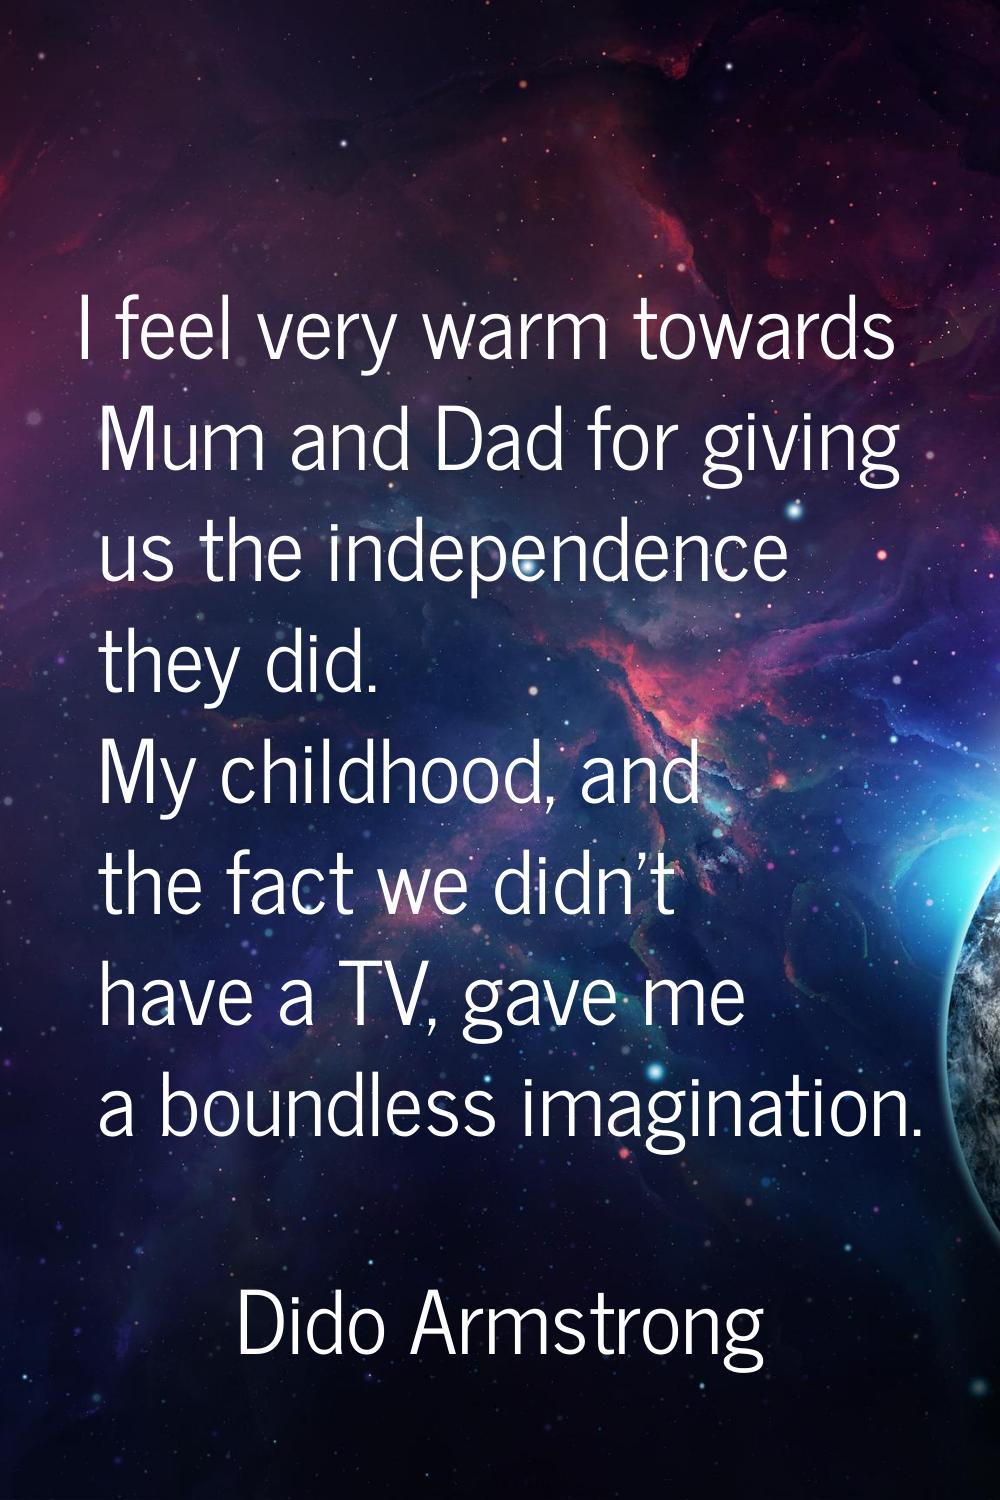 I feel very warm towards Mum and Dad for giving us the independence they did. My childhood, and the